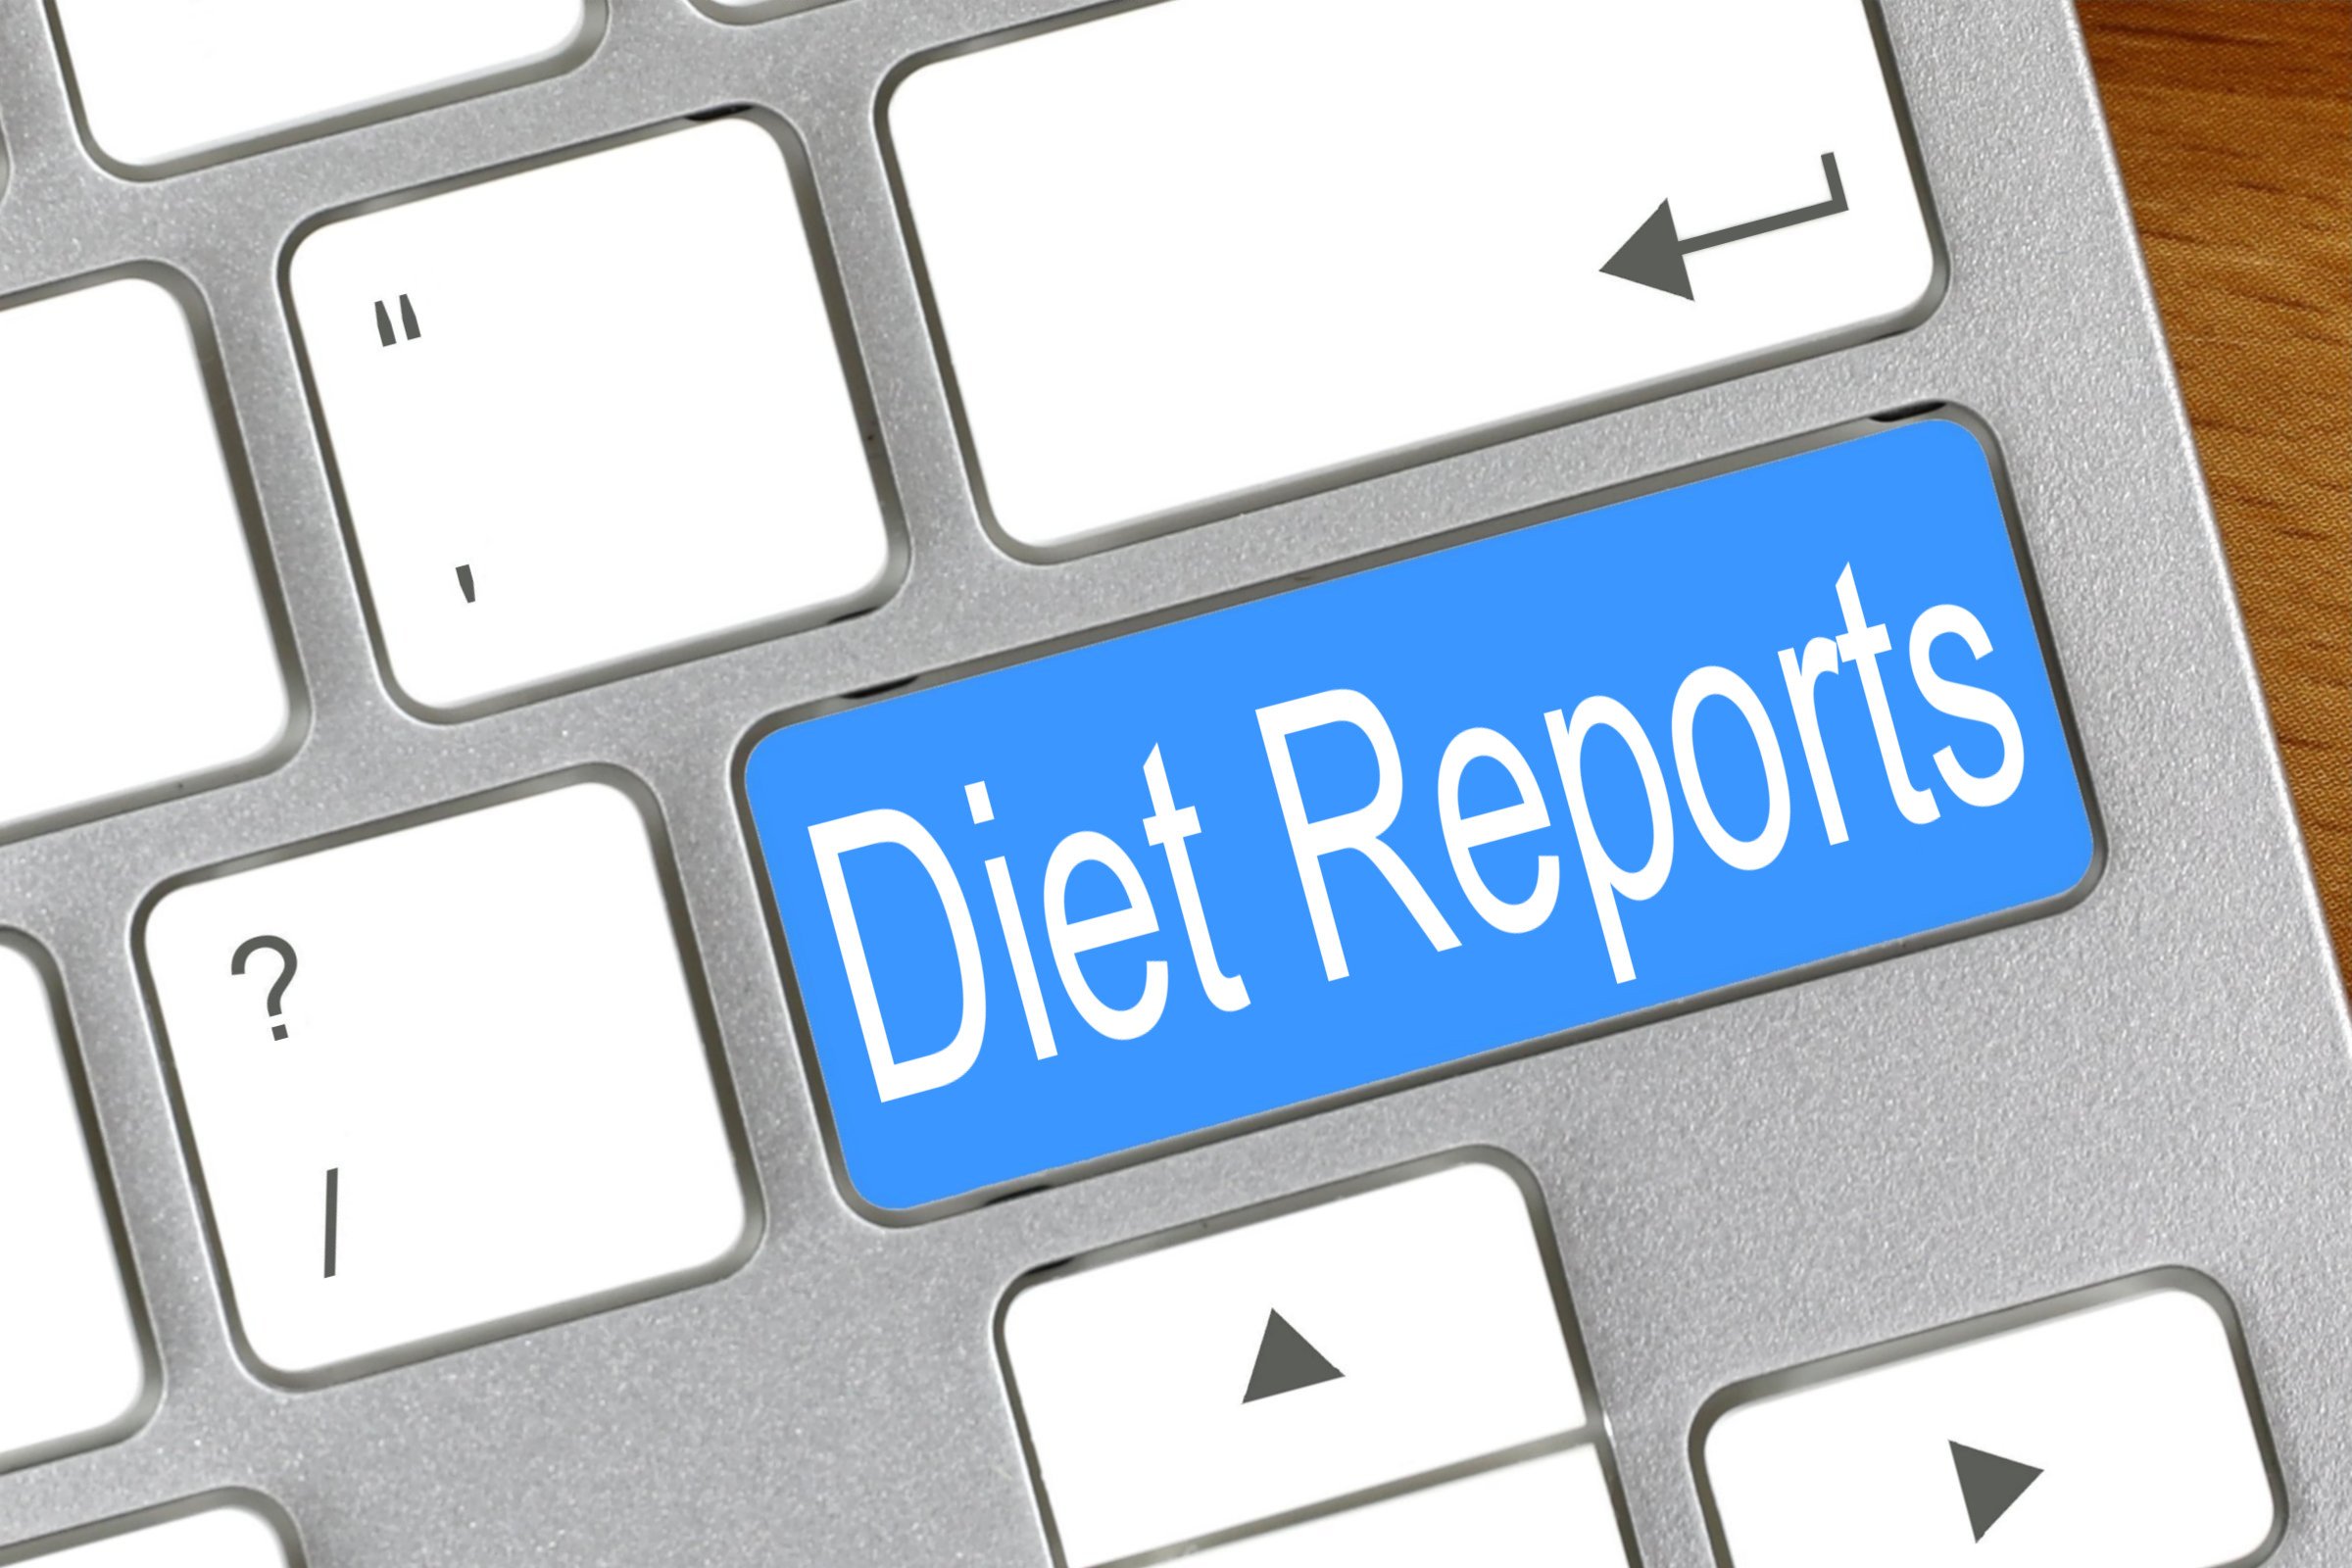 diet reports